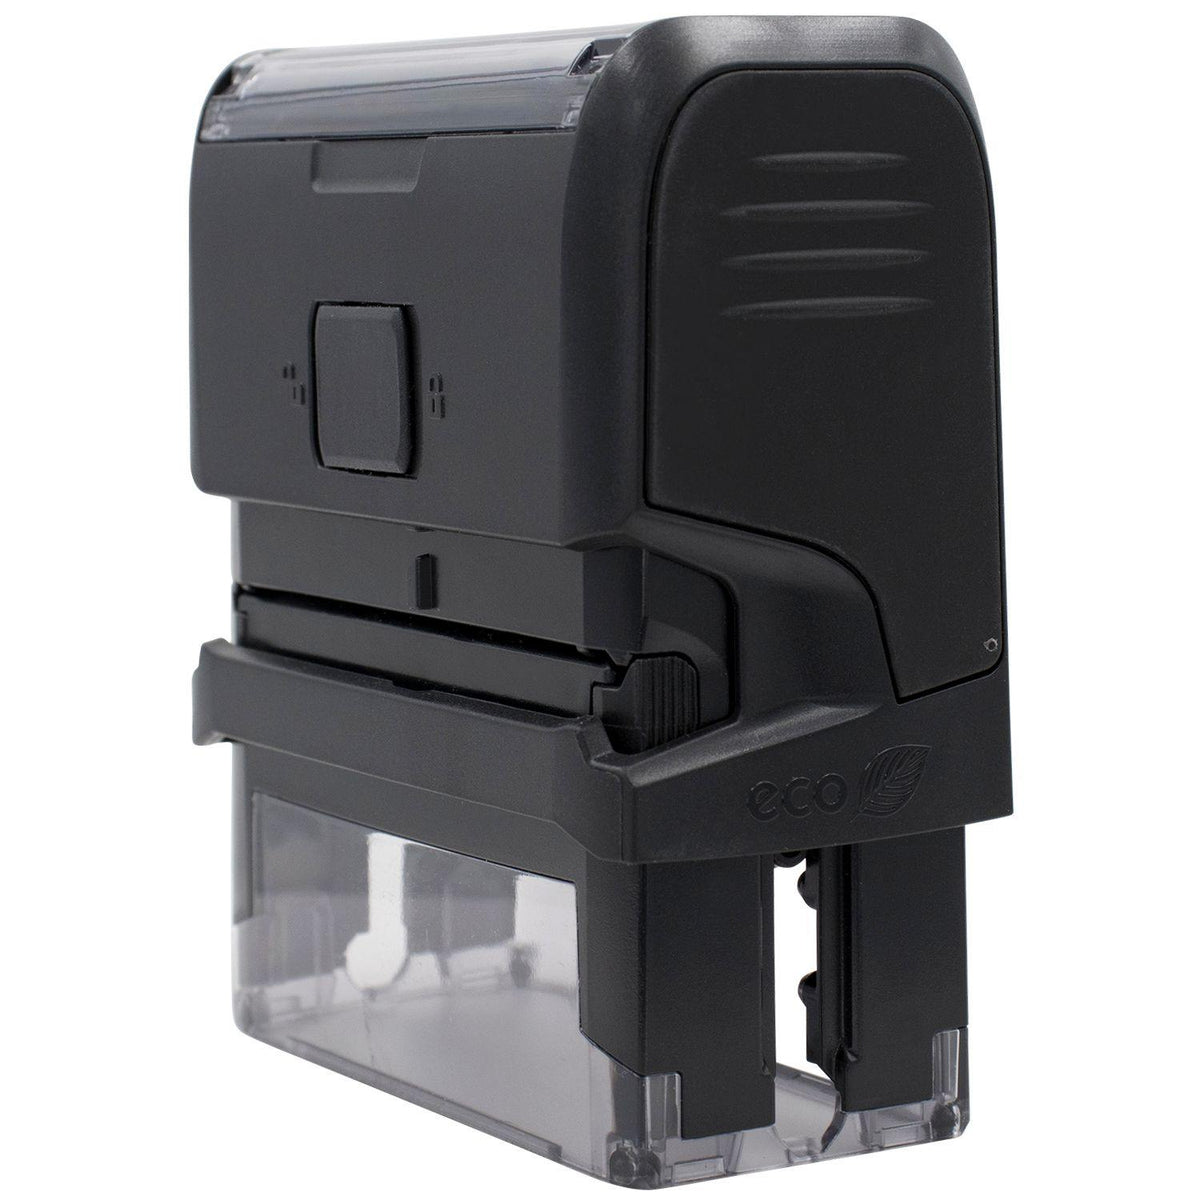 Large Self-Inking Outline Copy Stamp - Engineer Seal Stamps - Brand_Trodat, Impression Size_Large, Stamp Type_Self-Inking Stamp, Type of Use_General, Type of Use_Office